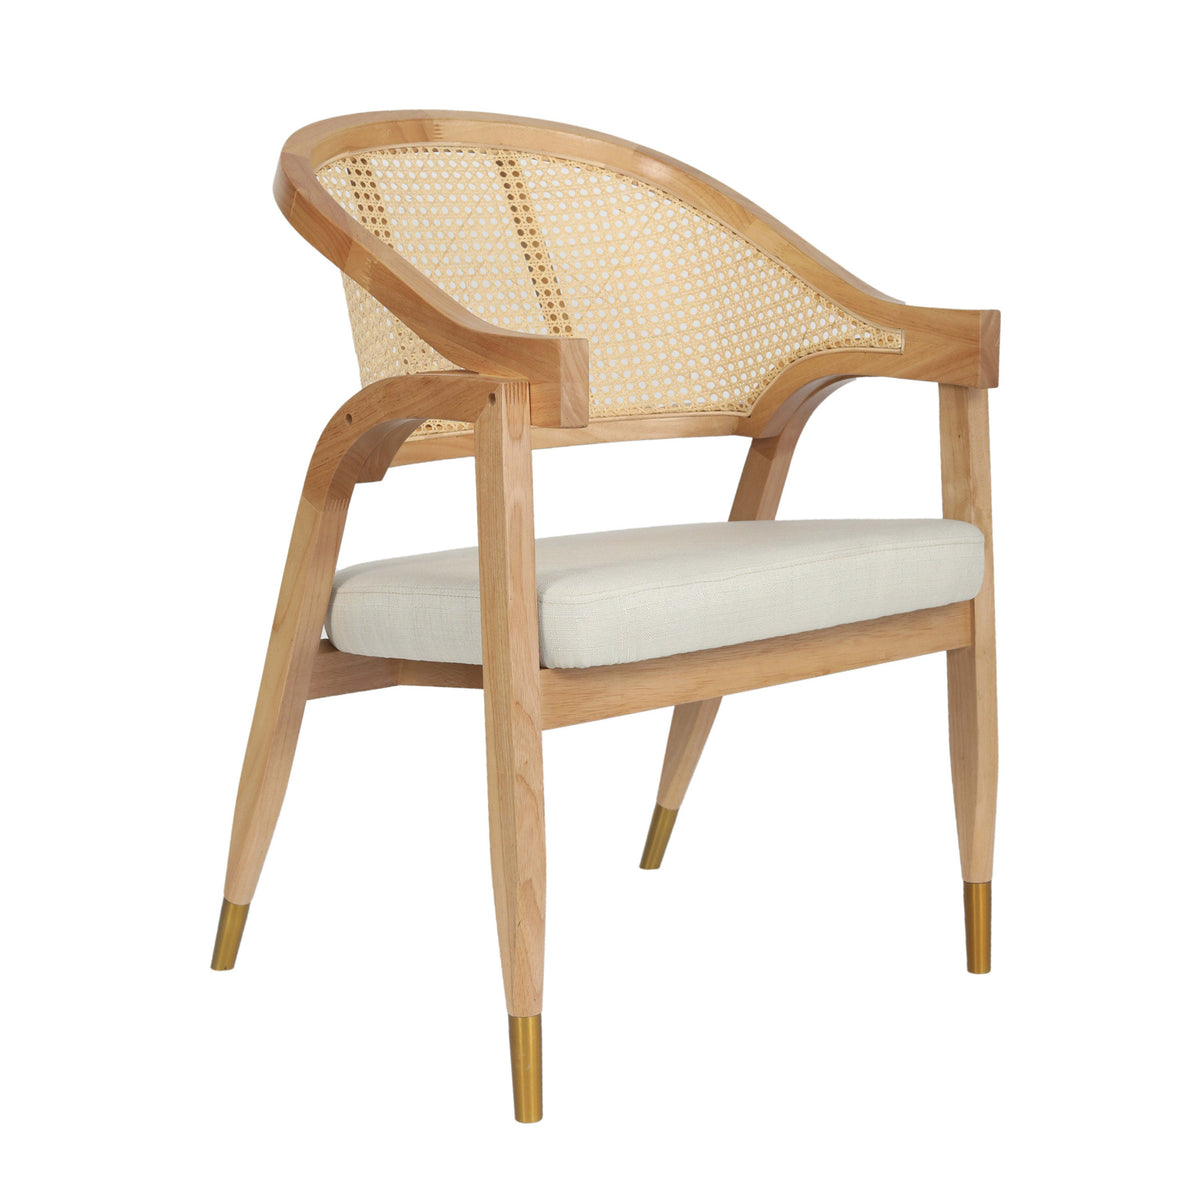 Natural |#| Commercial Grade Cane Rattan Dining Chair with Padded Seat - Natural